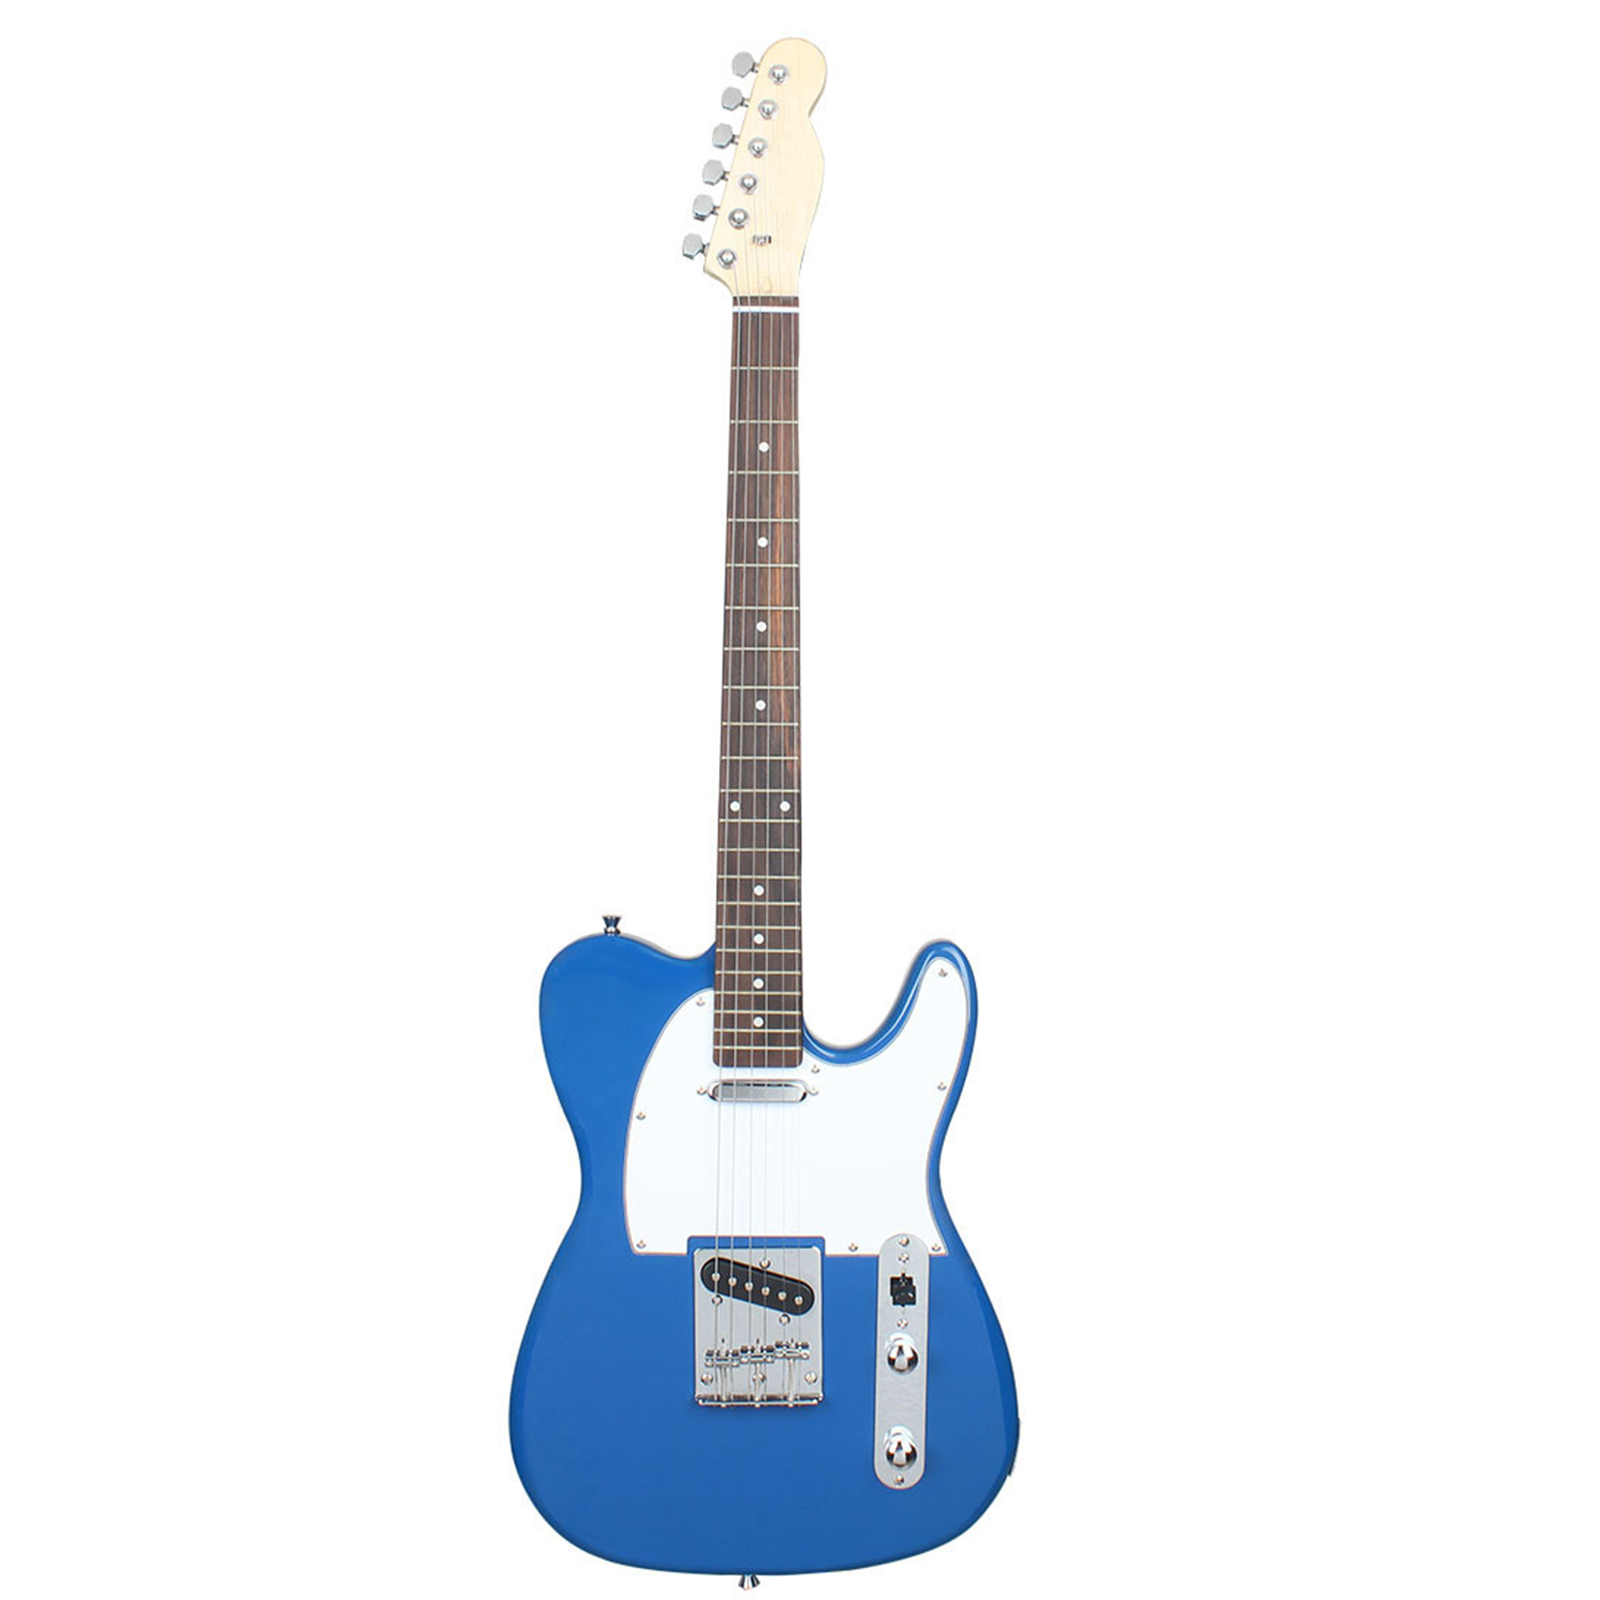 R-160 Series Handmade Electric Guitar With Connection Cable Wrenches Musical Instrument For Beginners